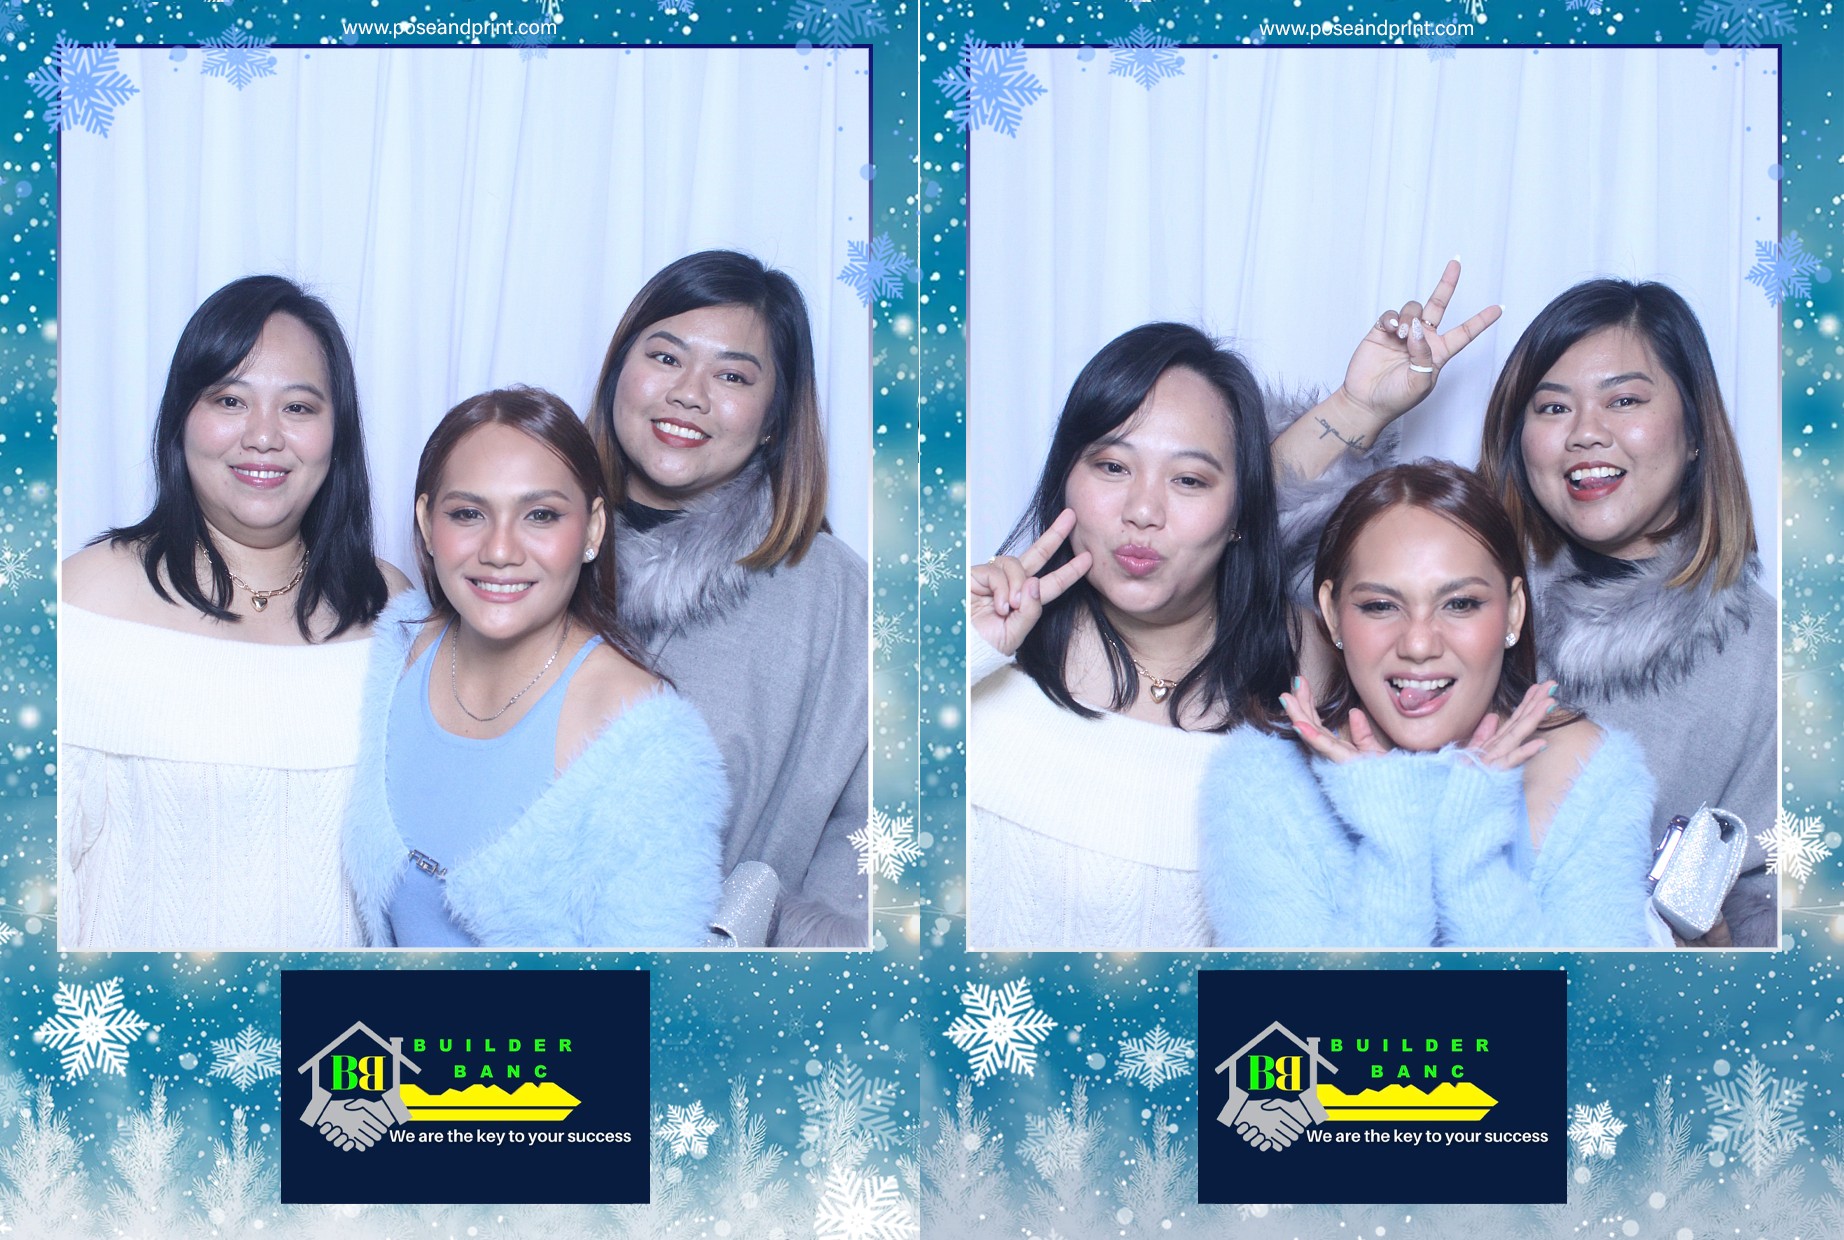 Builder Banc Thanksgiving Party – MirrorBooth